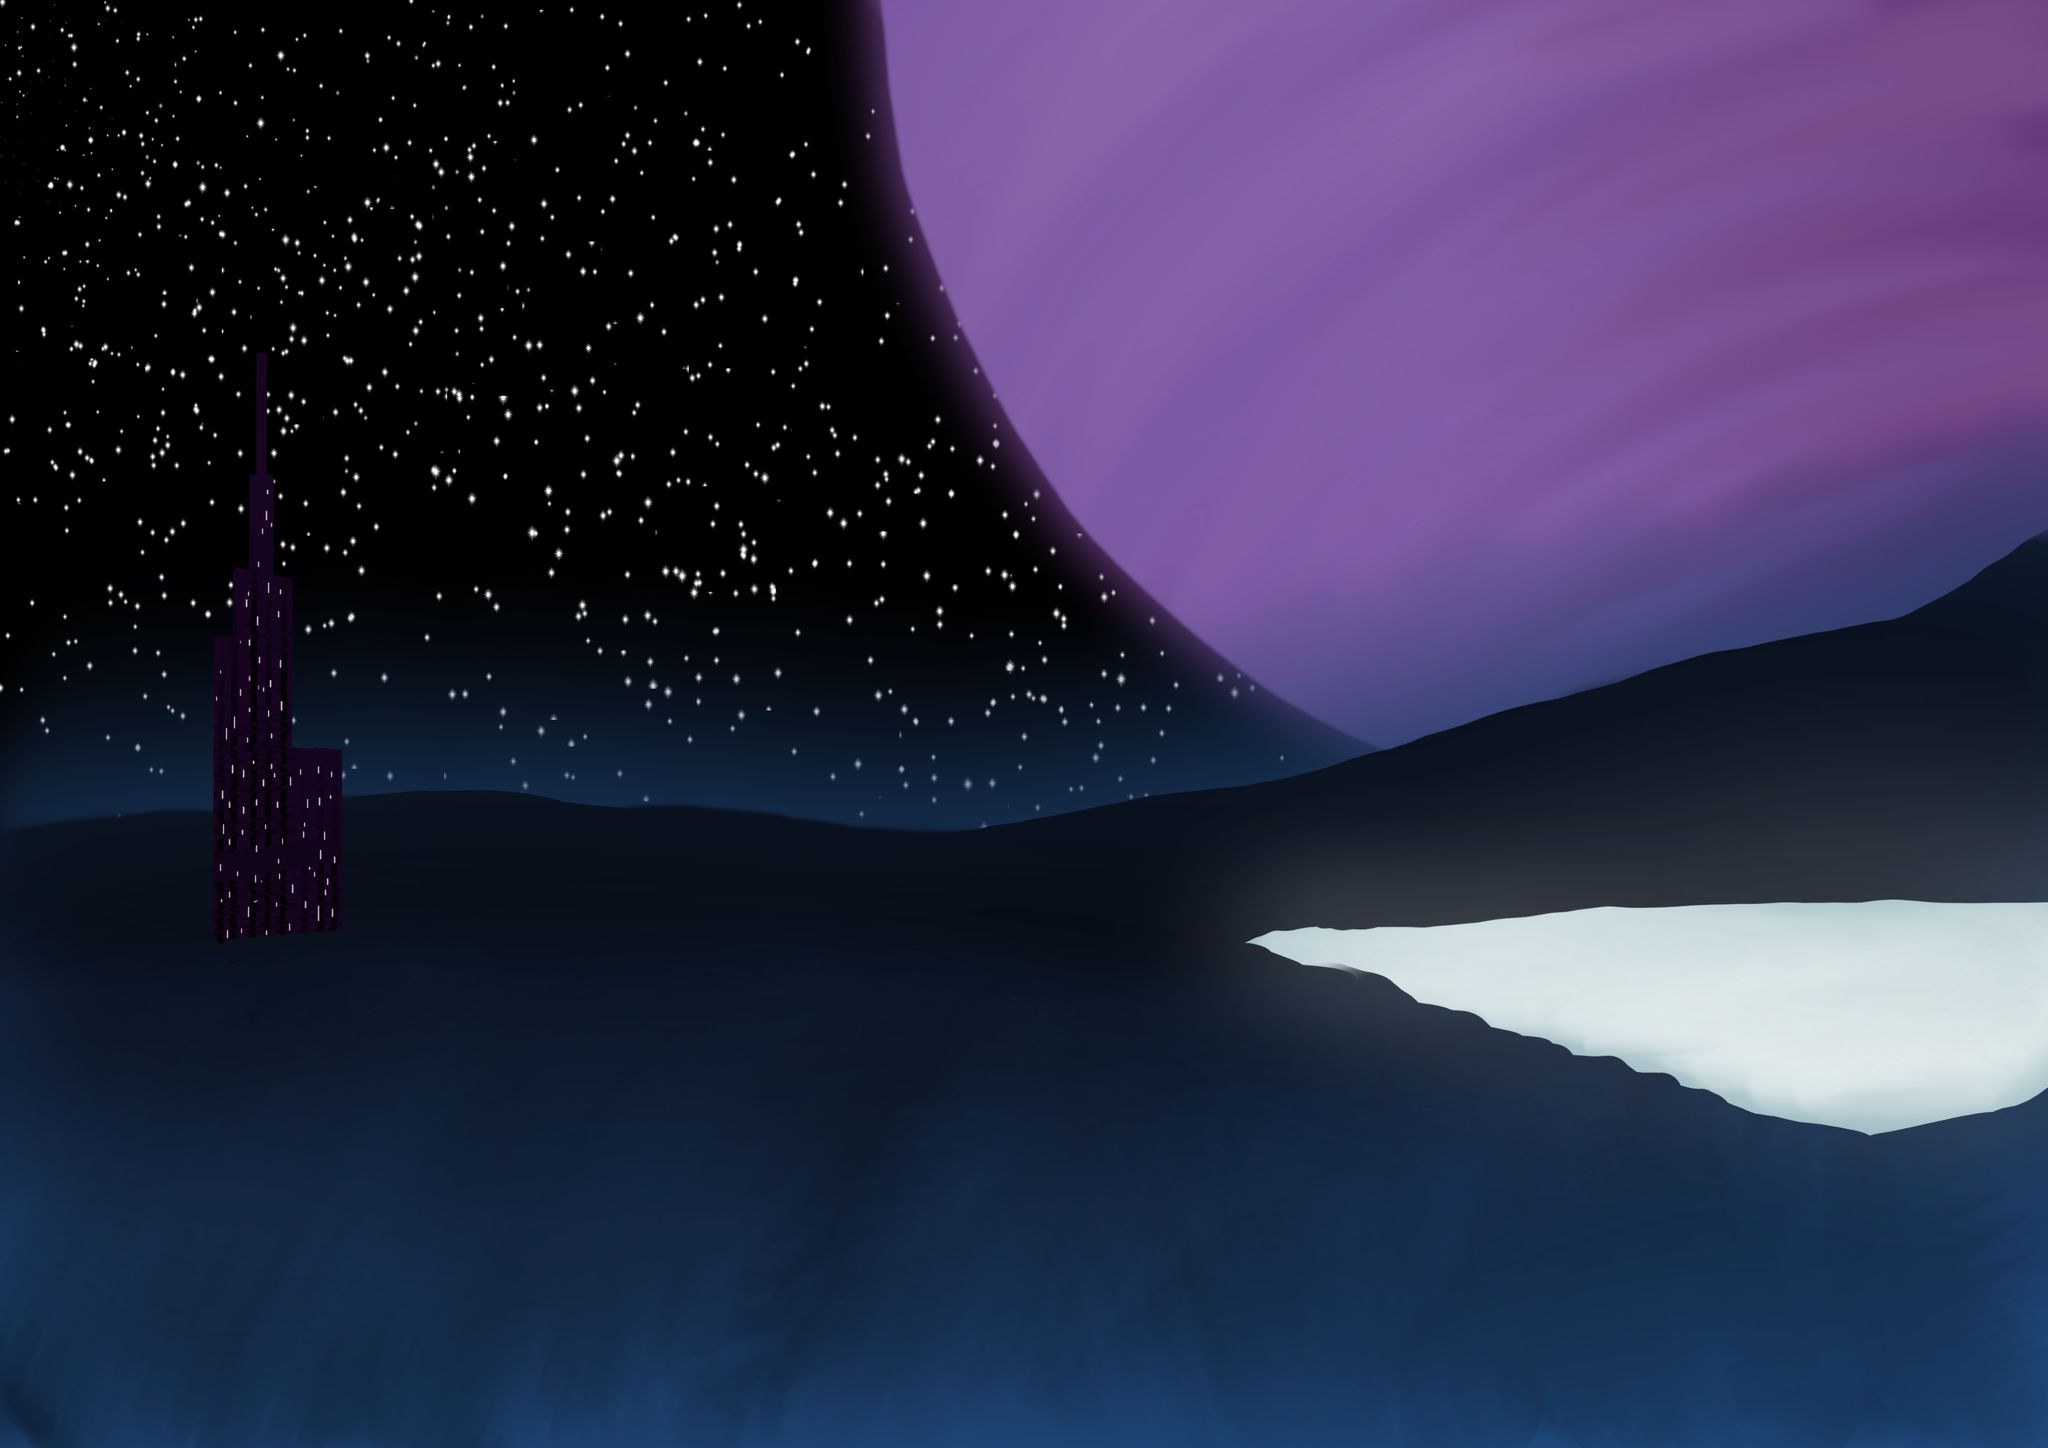 A nighttime scene, a large purple Jupiter-like planet is looming over the mountains at the top-right, a lake of glowing blue liquid sits at the right, and a tall dark purple tower with yellow lights on stands at the left.